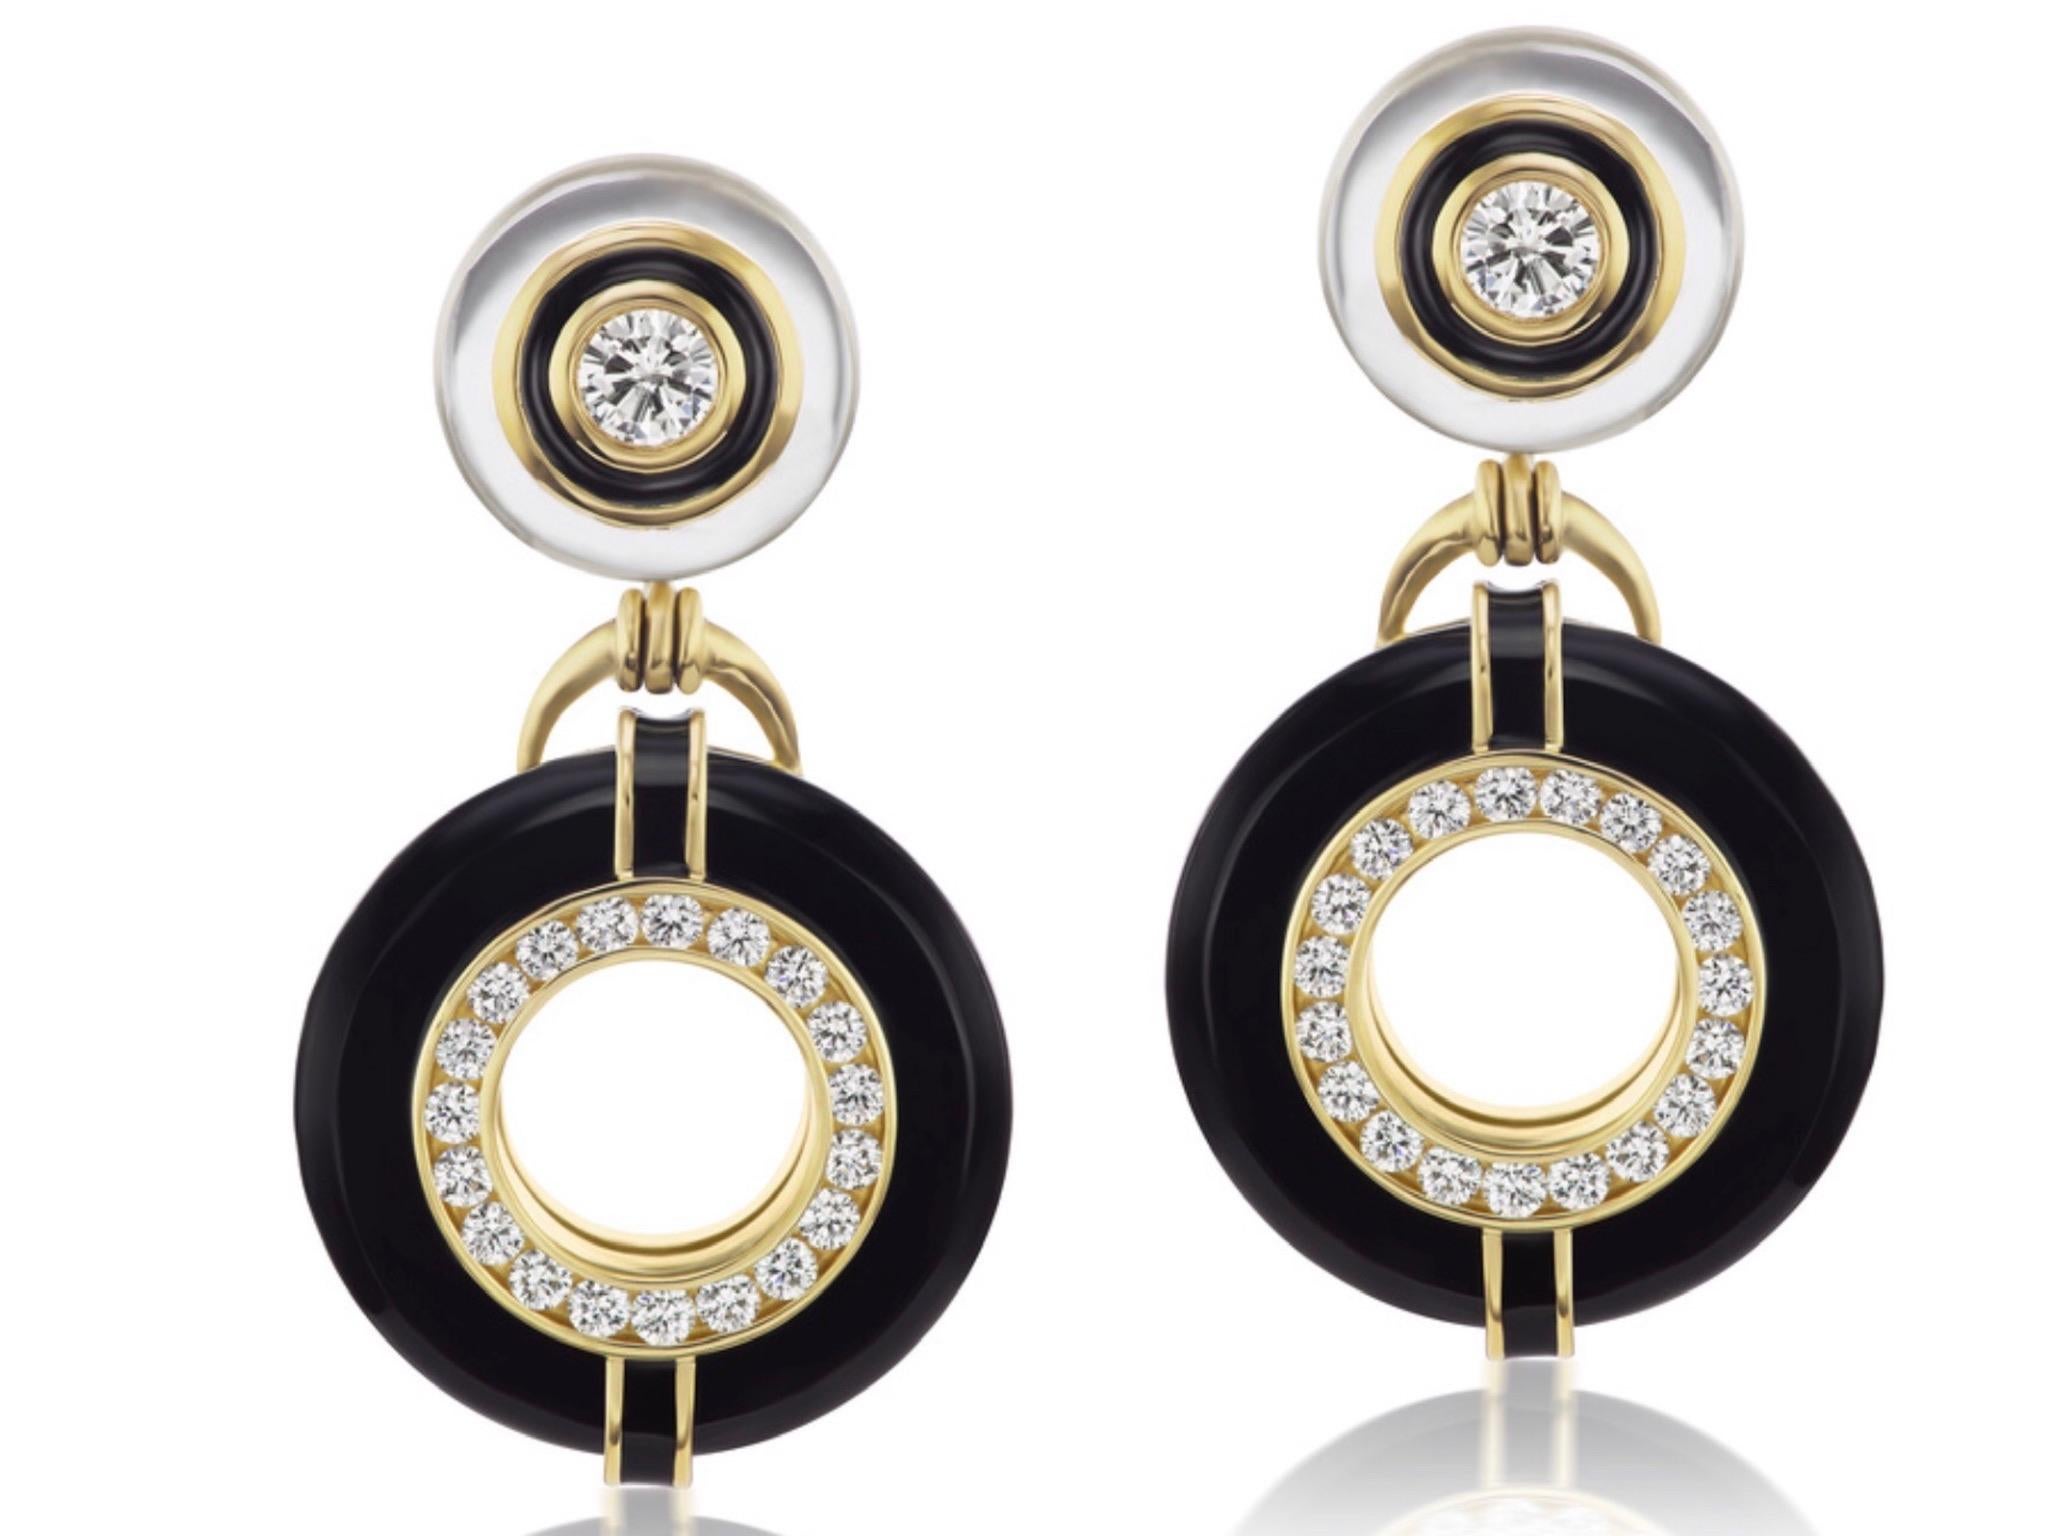 Andrew Glassford's Donut Series III earrings have incorporated a modern art-deco look with diamonds and black enamel in 18K Yellow Gold. 7 carats carats of clear Rock Crystal make up the top 12mm disc. The polished rock crystal discs have .44 carats